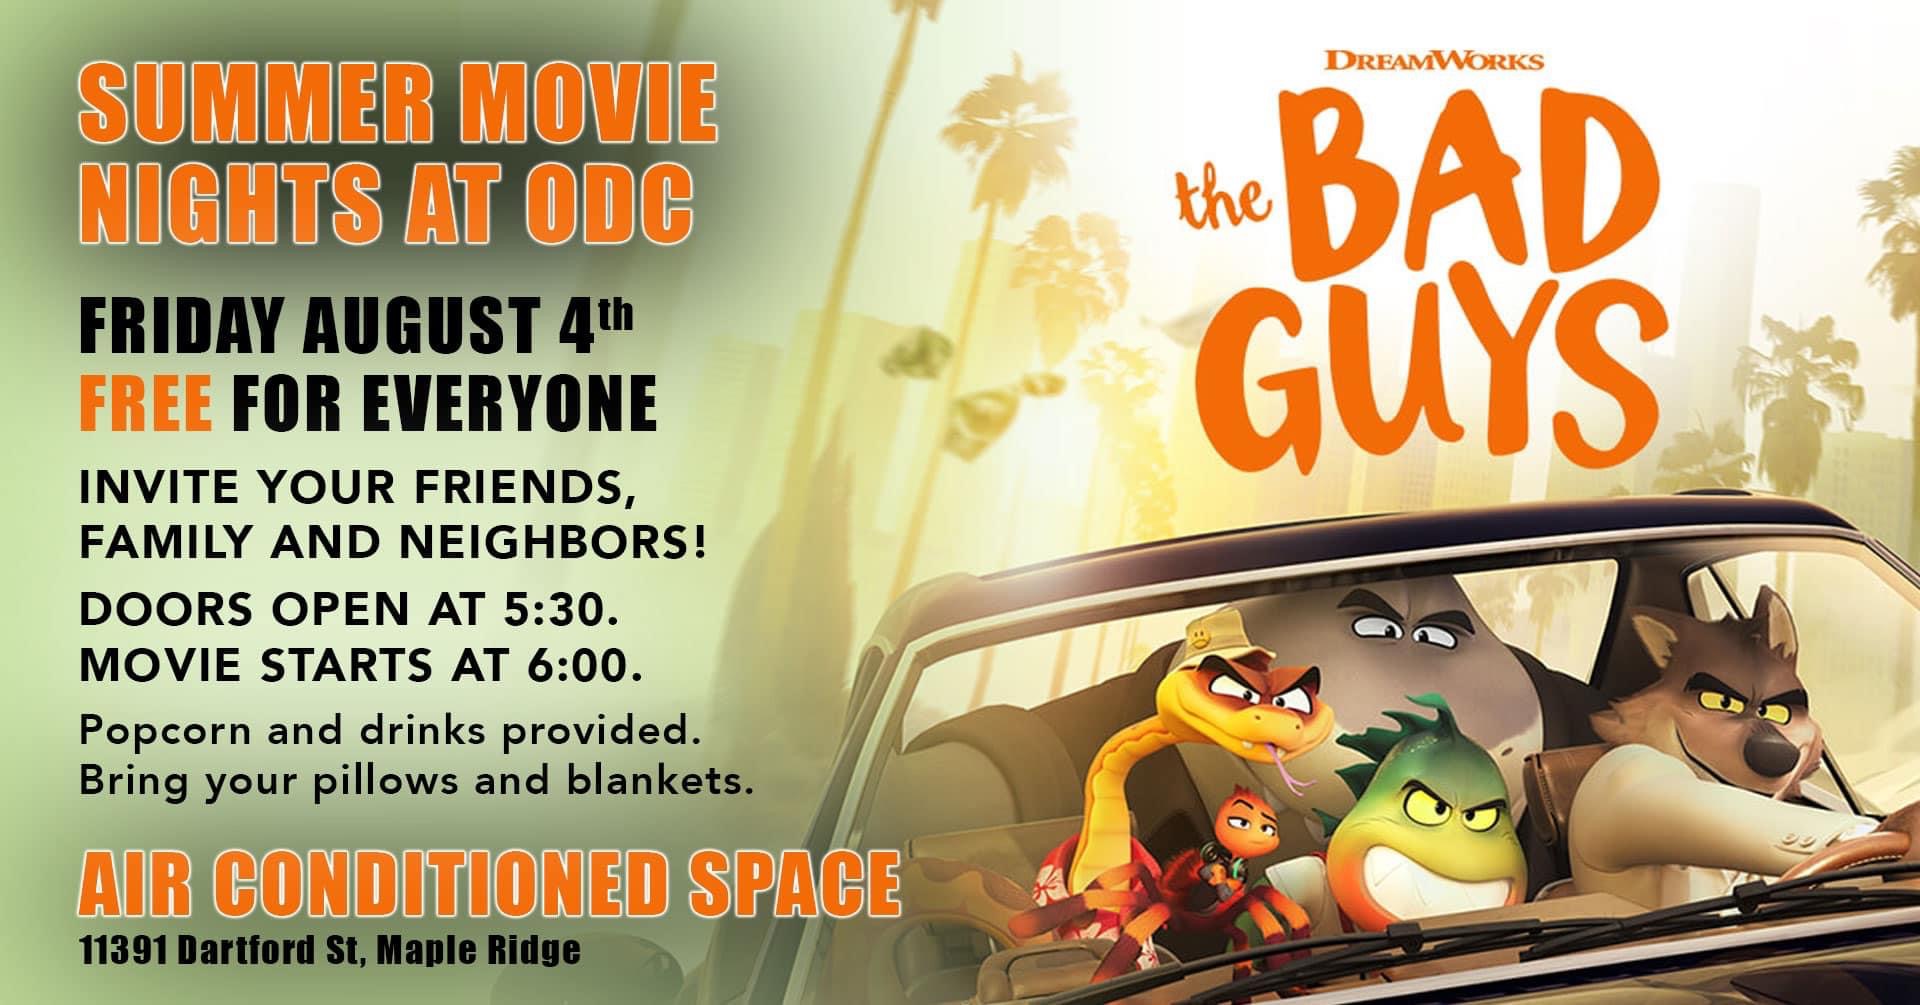 Movie night poster for "The Bad Guys" at open door church